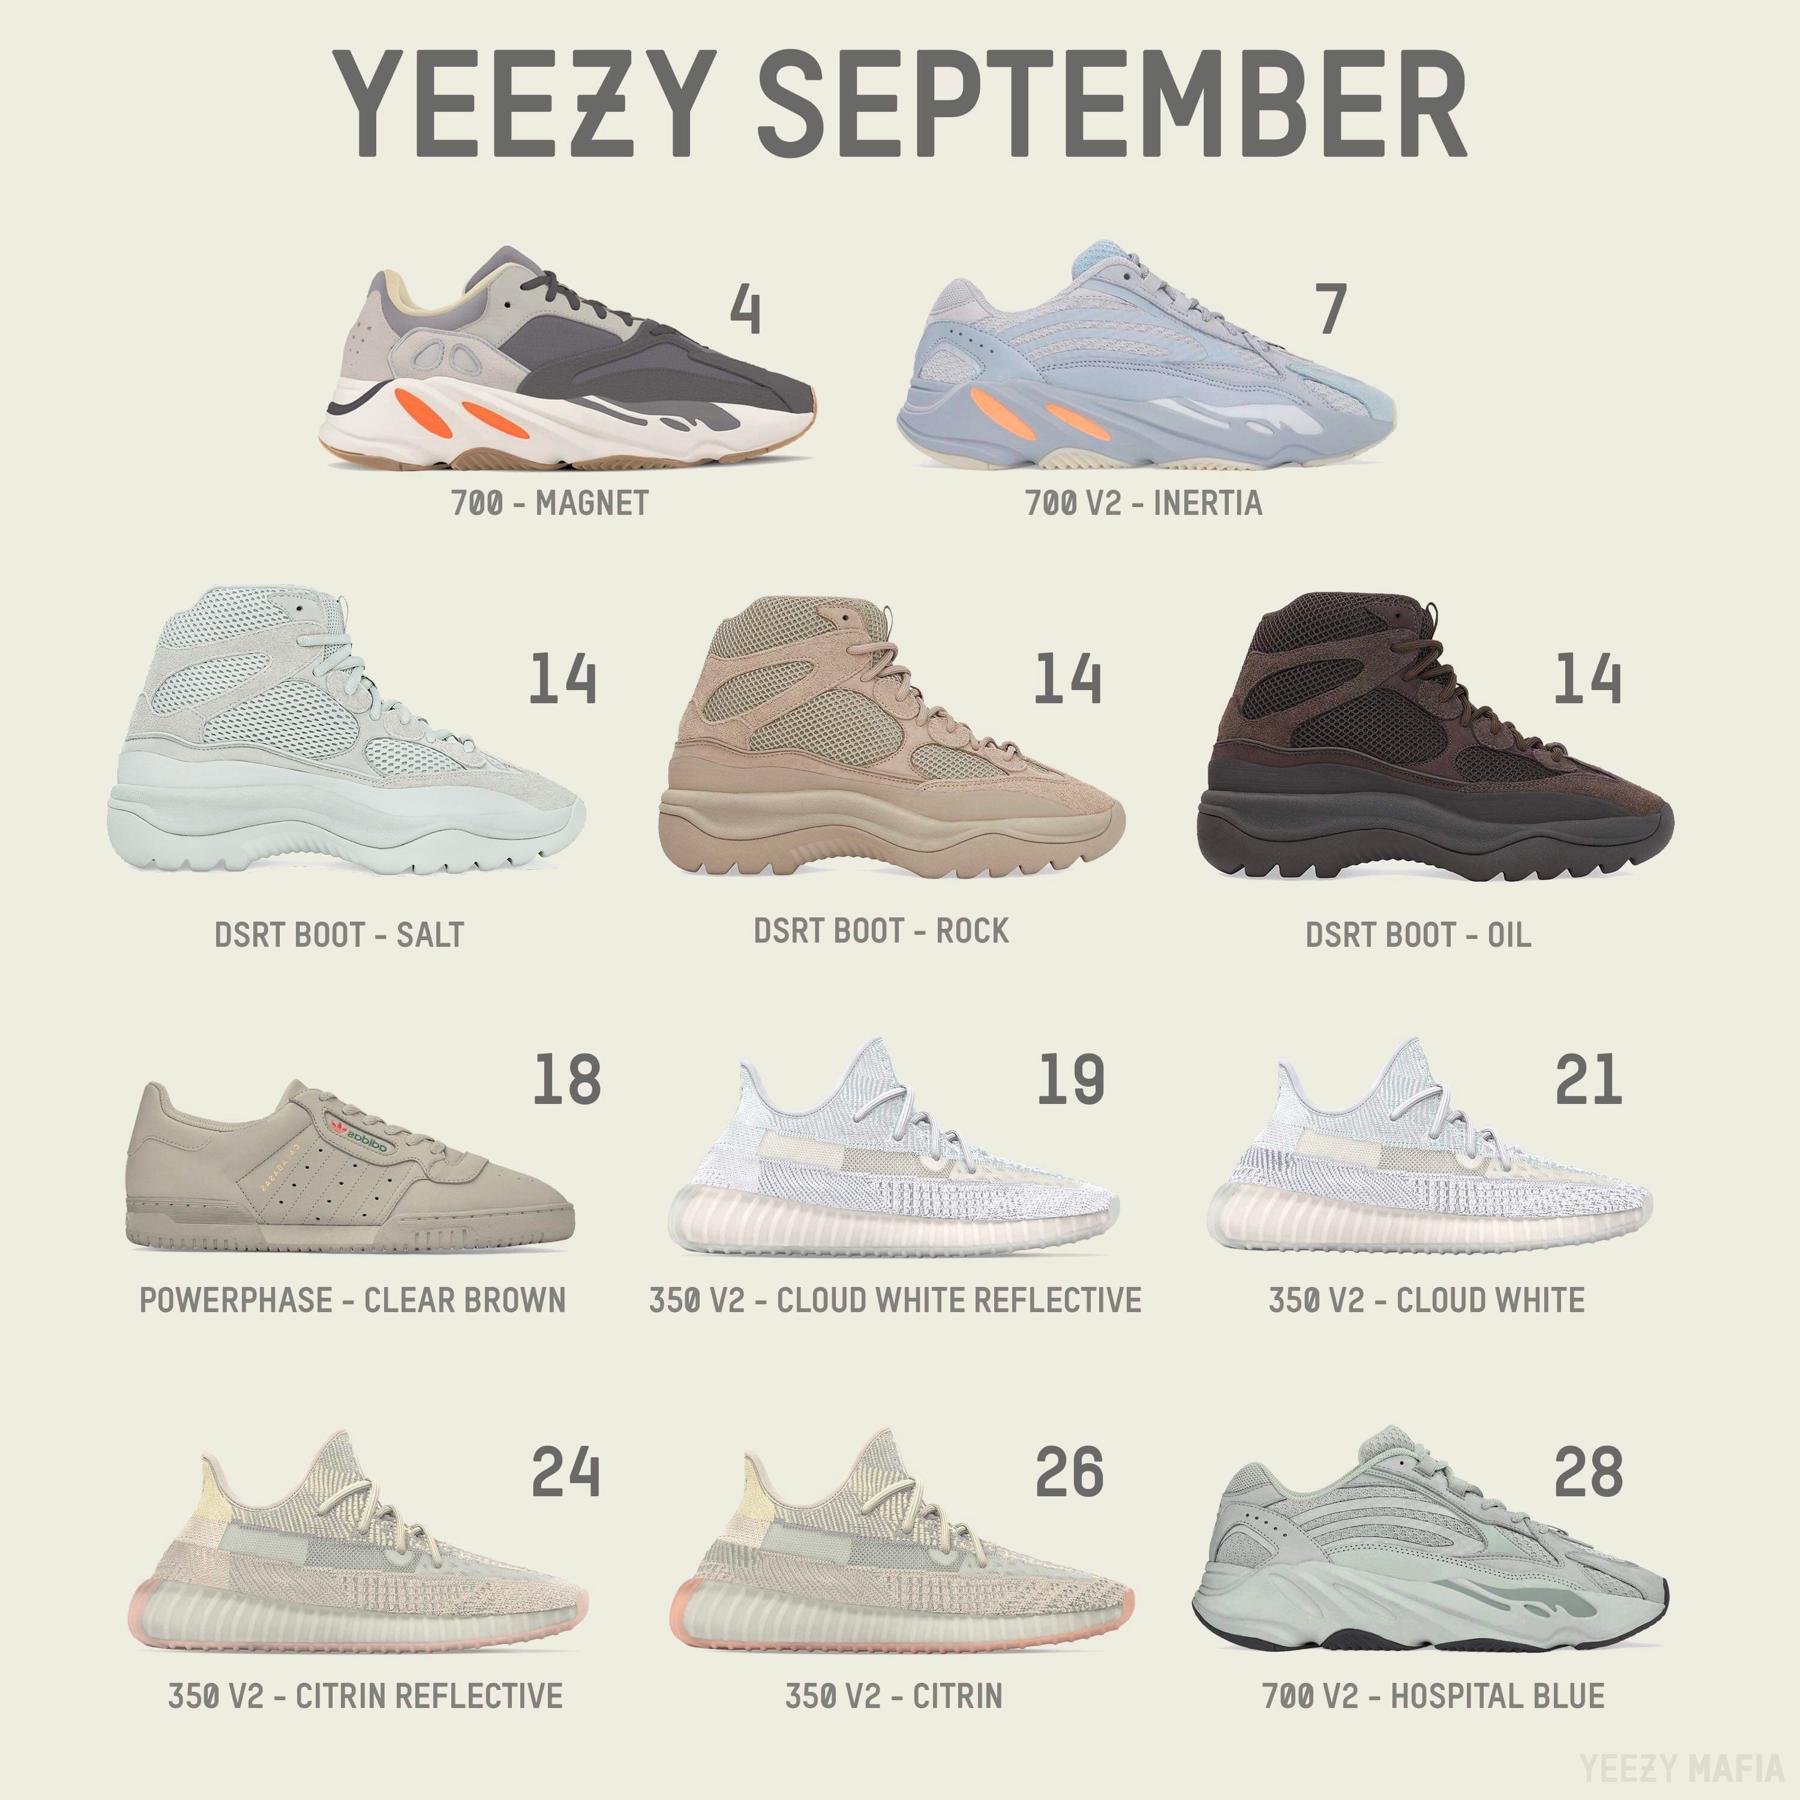 when are new yeezys coming out 2019